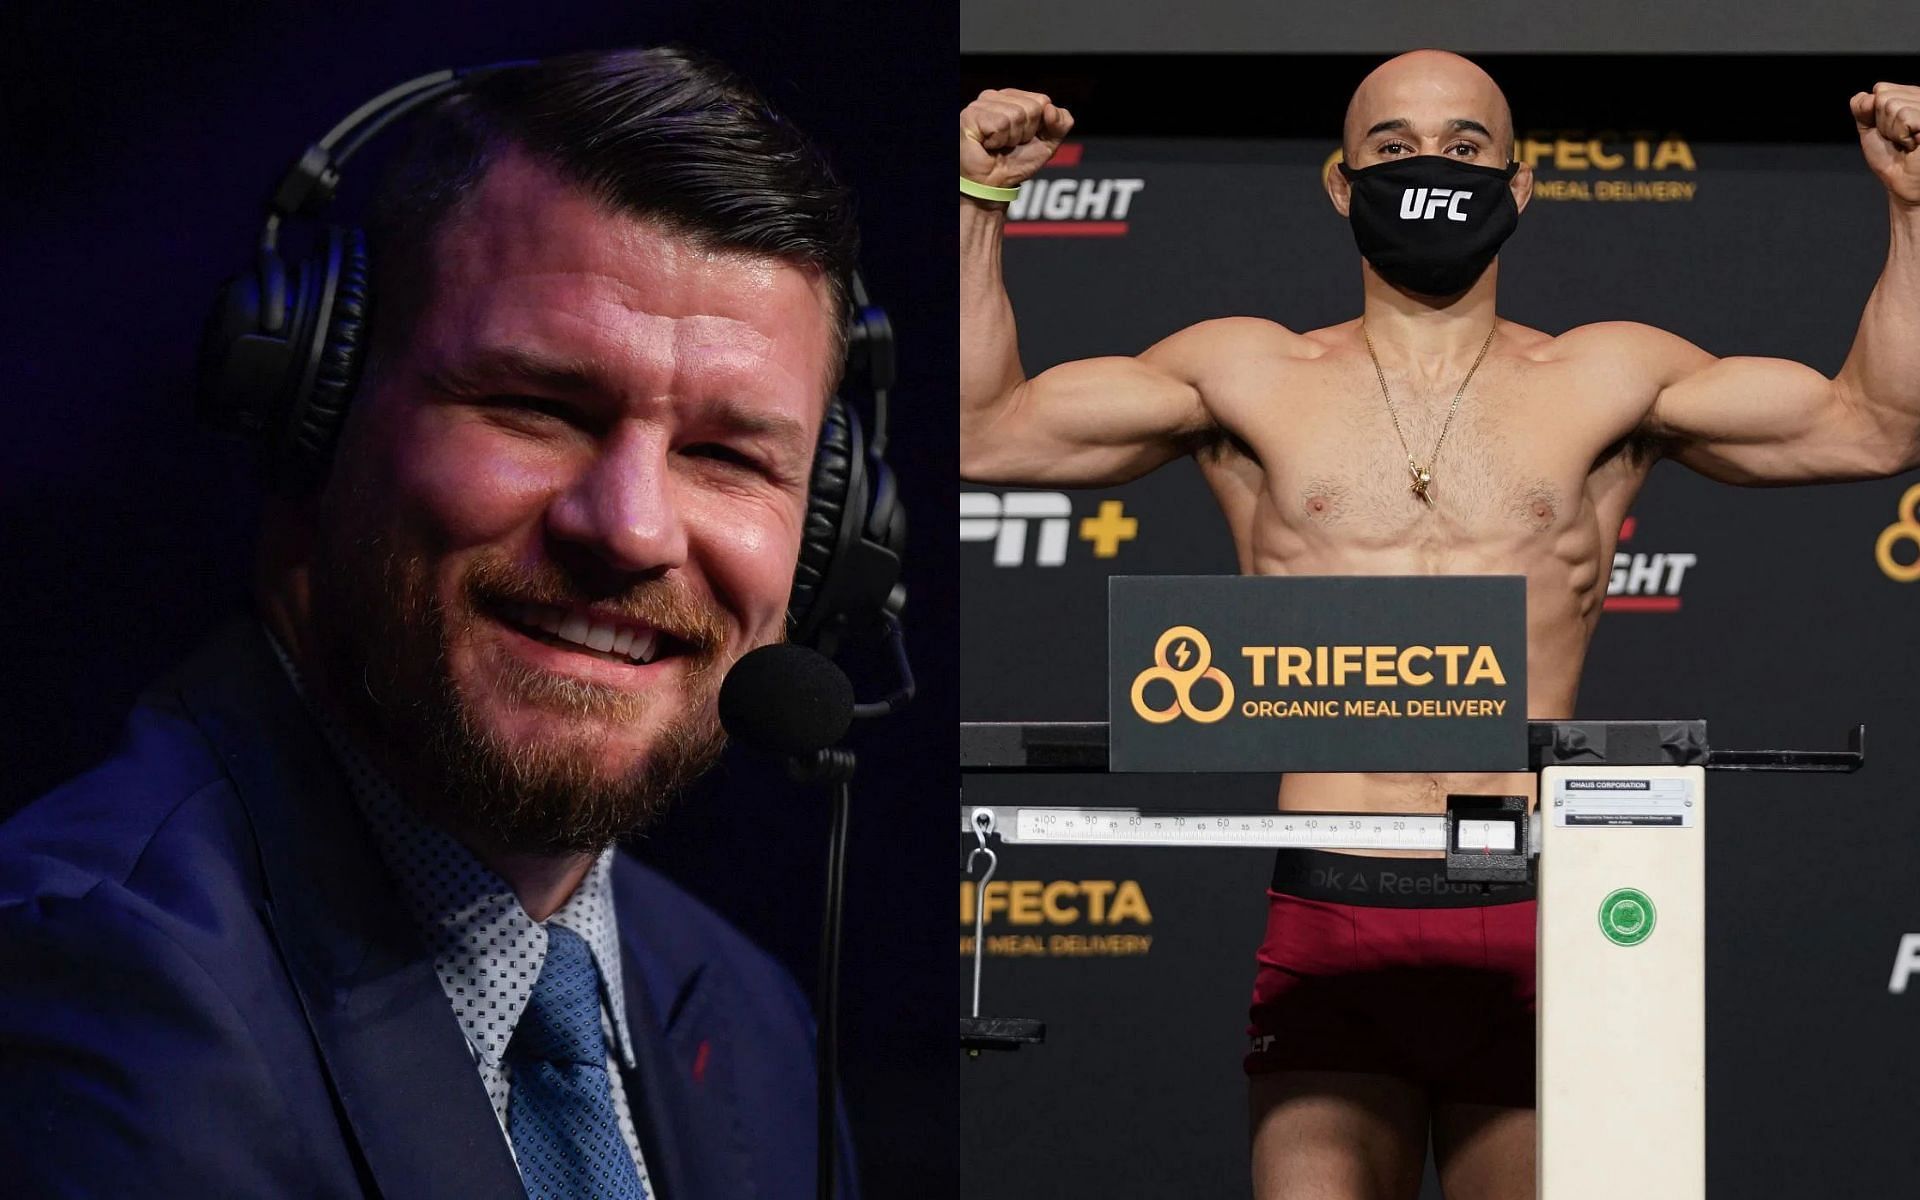 Michael Bisping (Left) and Marlon Moraes (Right) (Images courtesy of Getty)